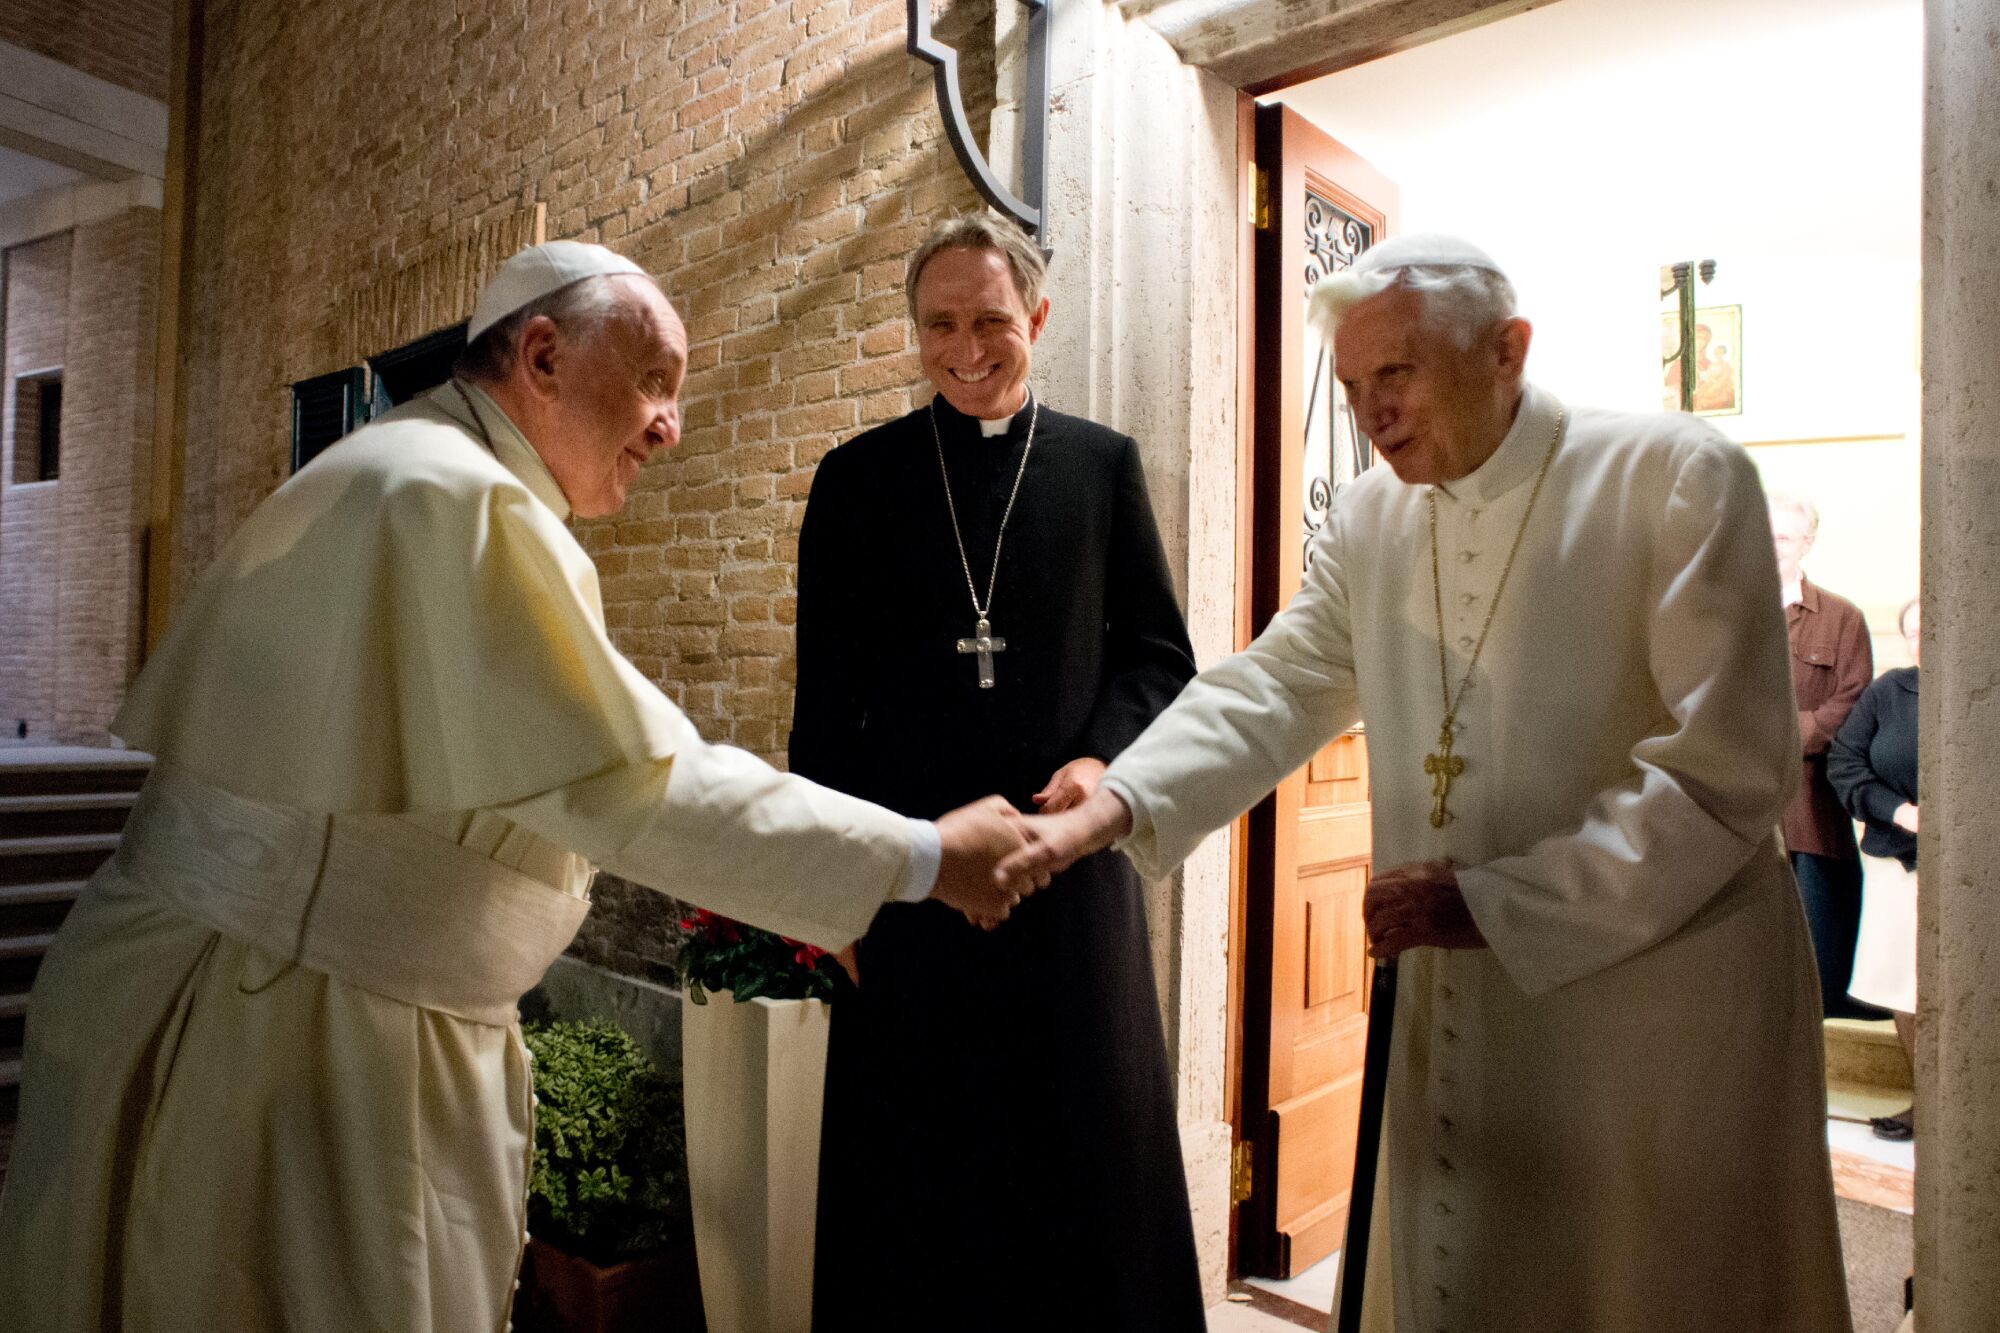 Pope Francis and Pope Emeritus Benedict XVI shake hands as a priest looks on.